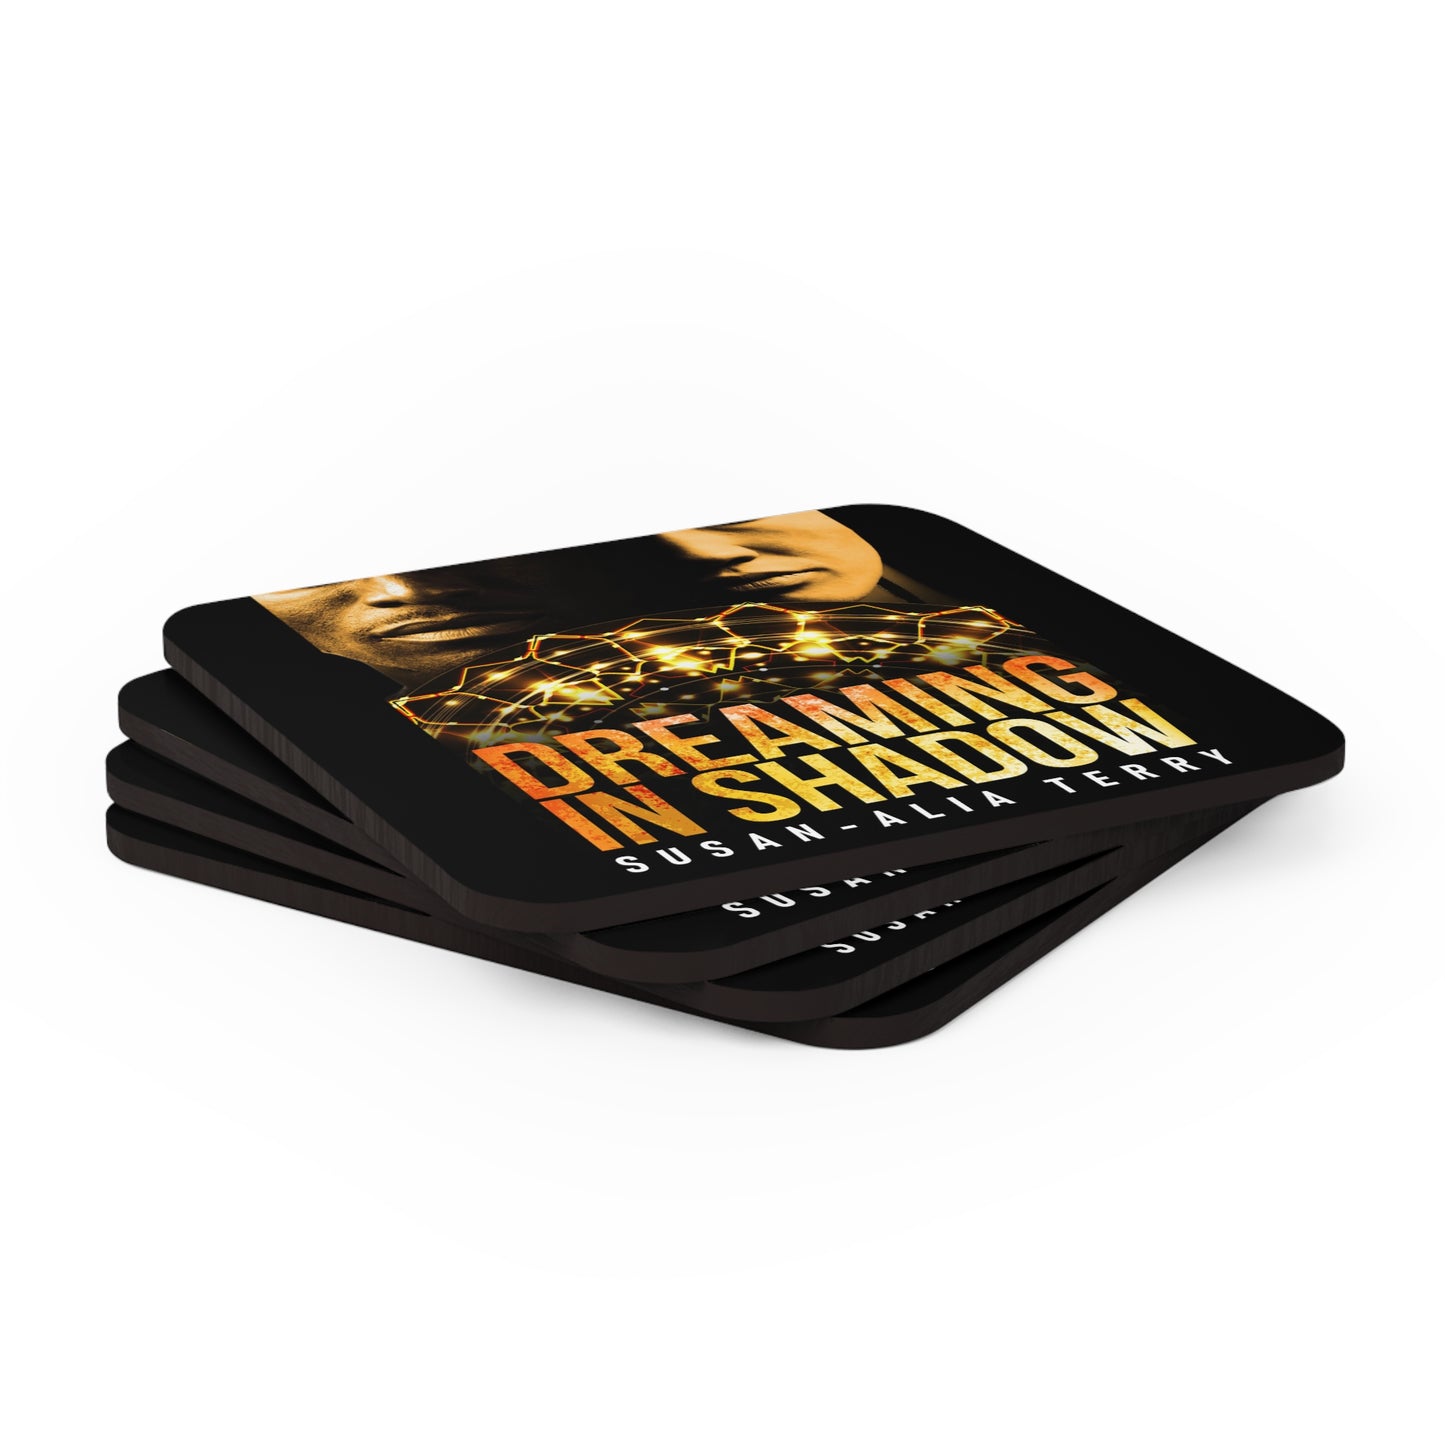 Dreaming In Shadow - Corkwood Coaster Set